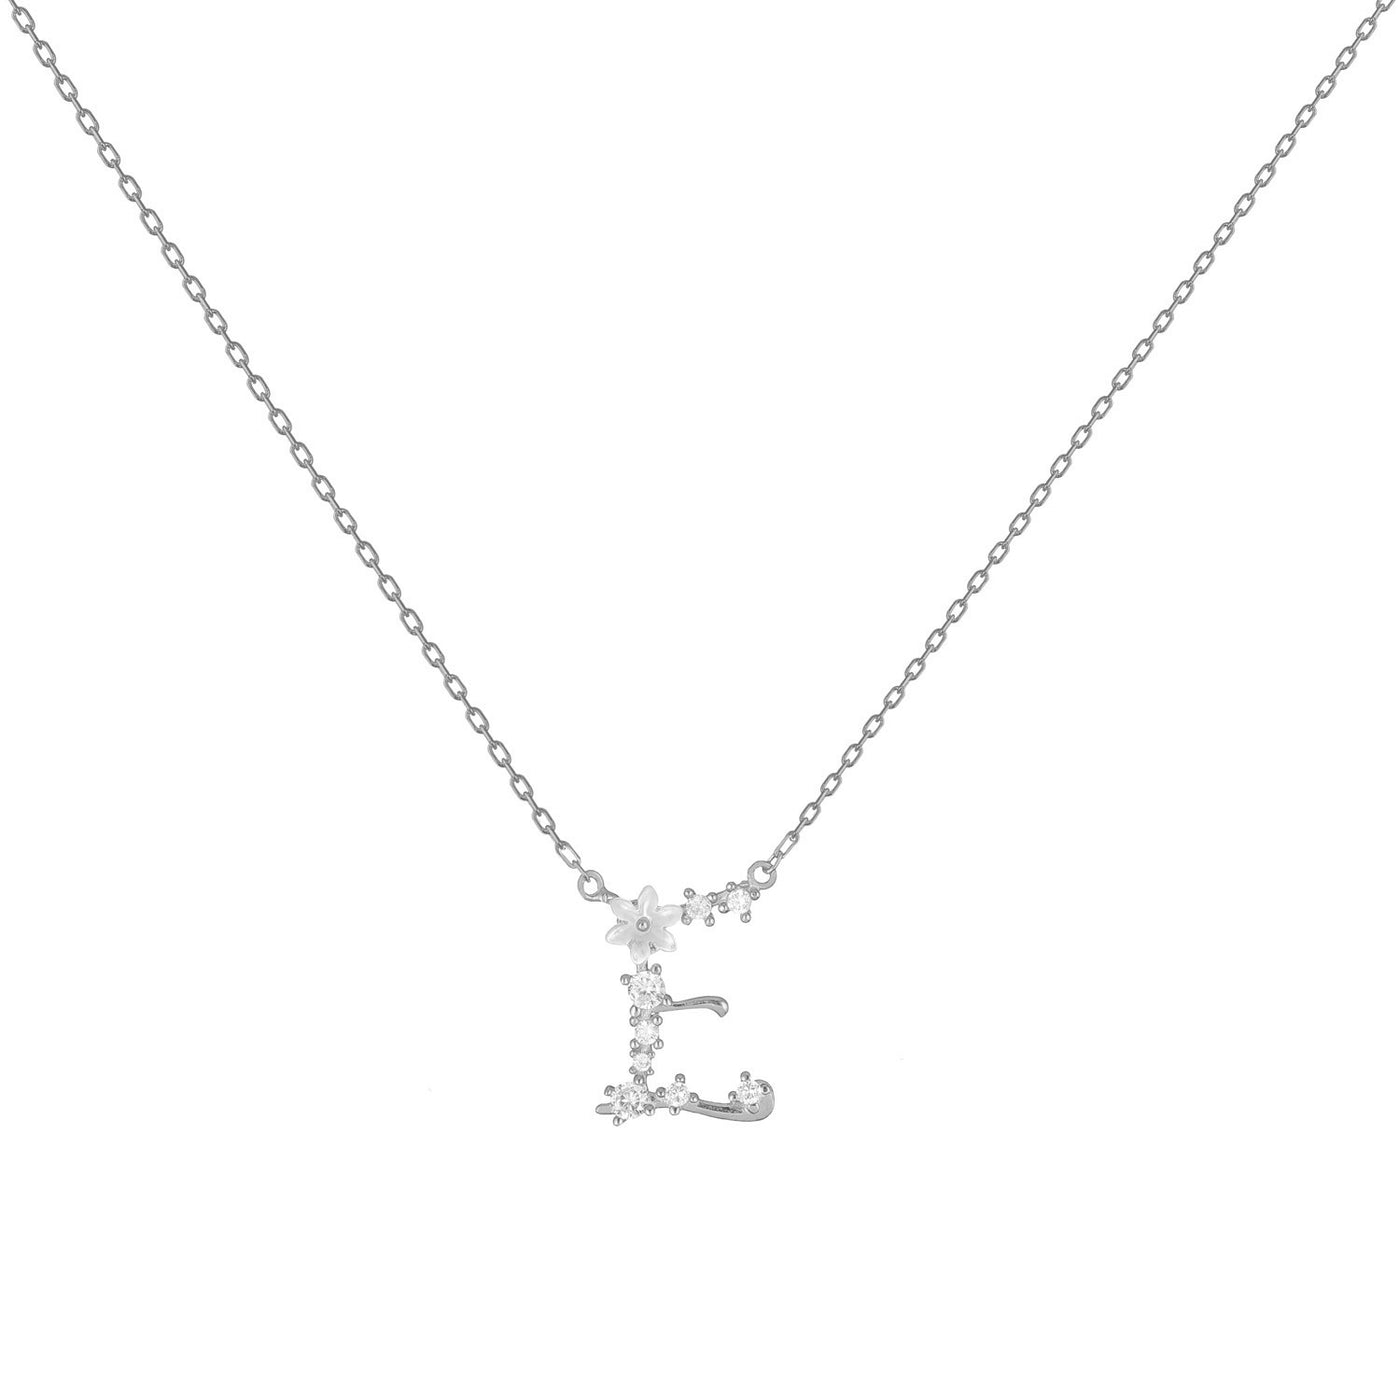 Daisy letter necklace with zirconia